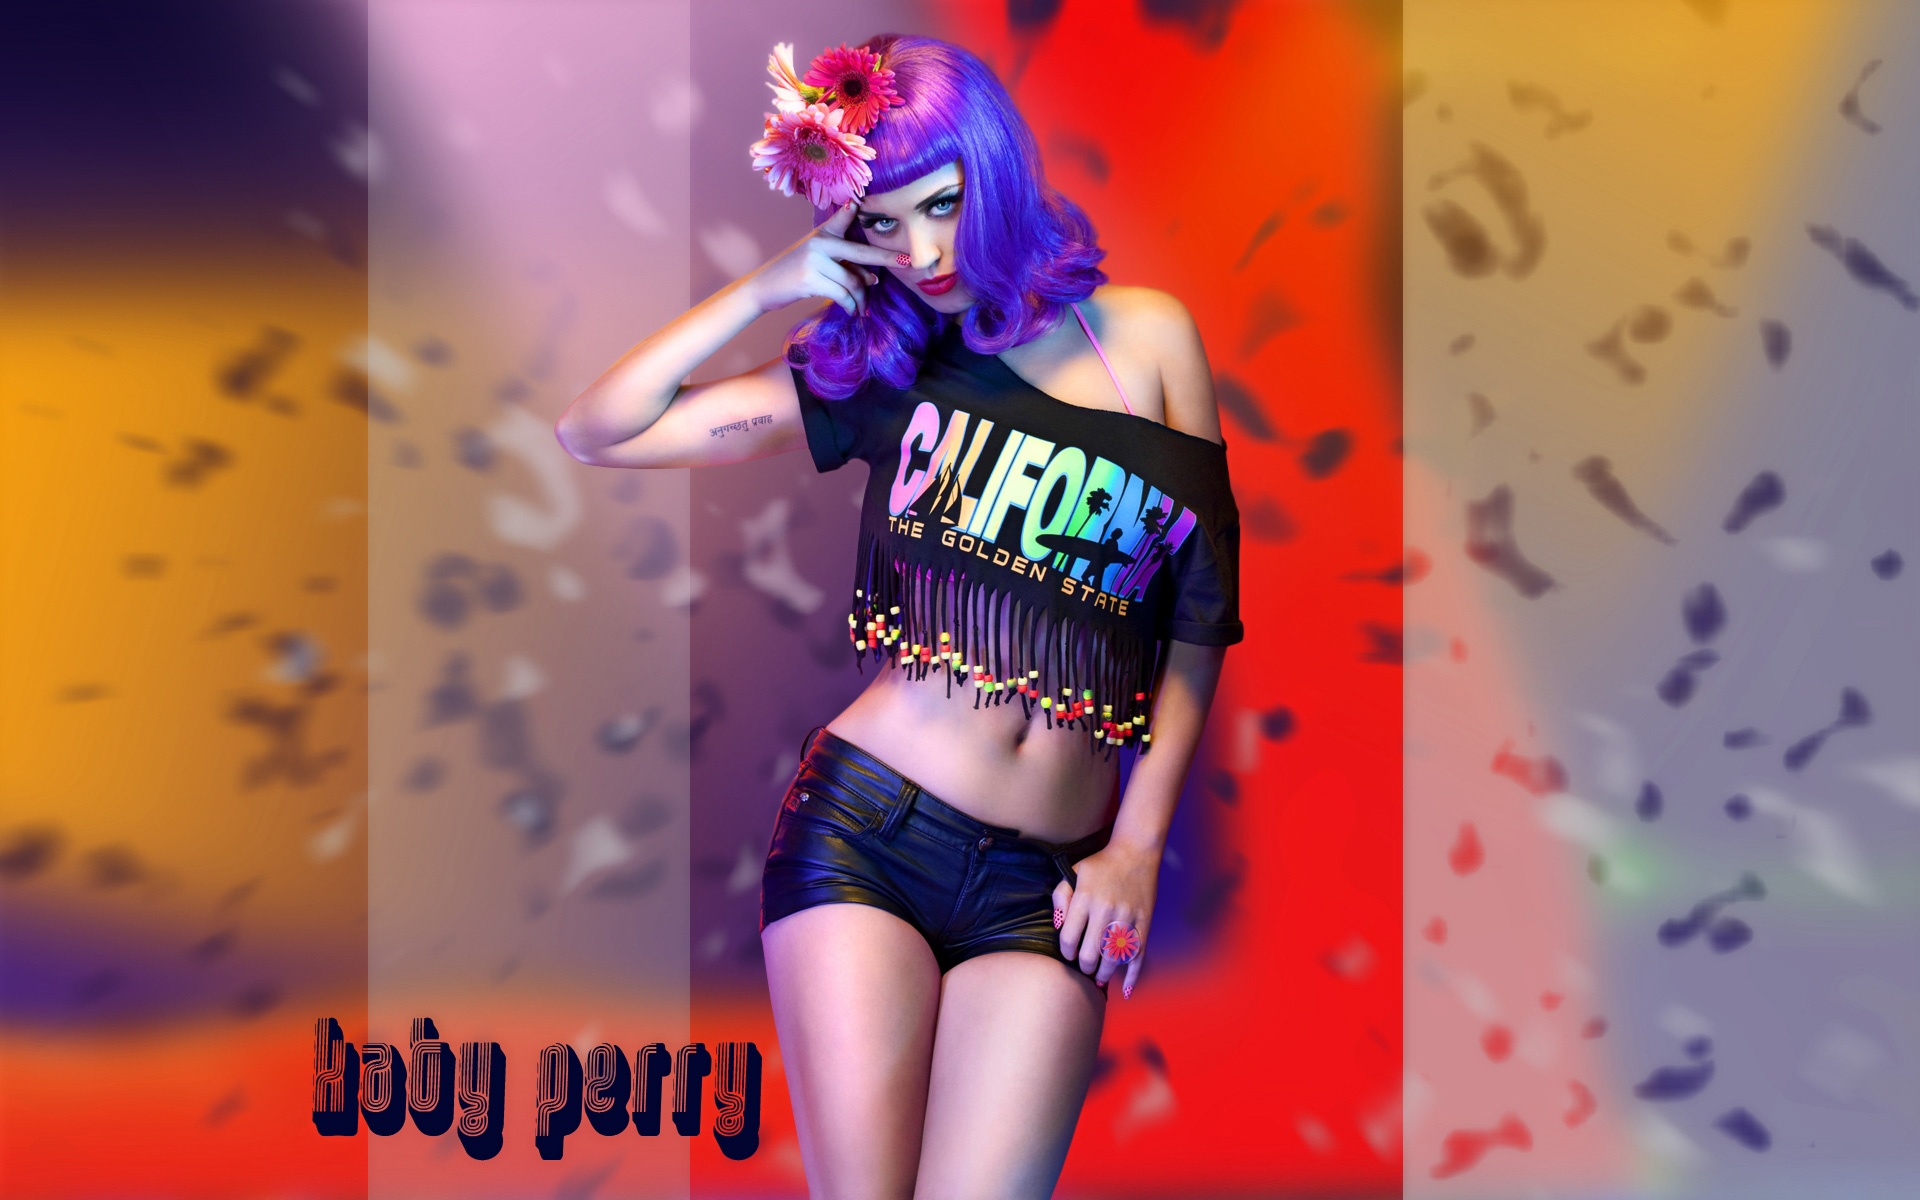 Katy Perry desktop wallpaper with music theme